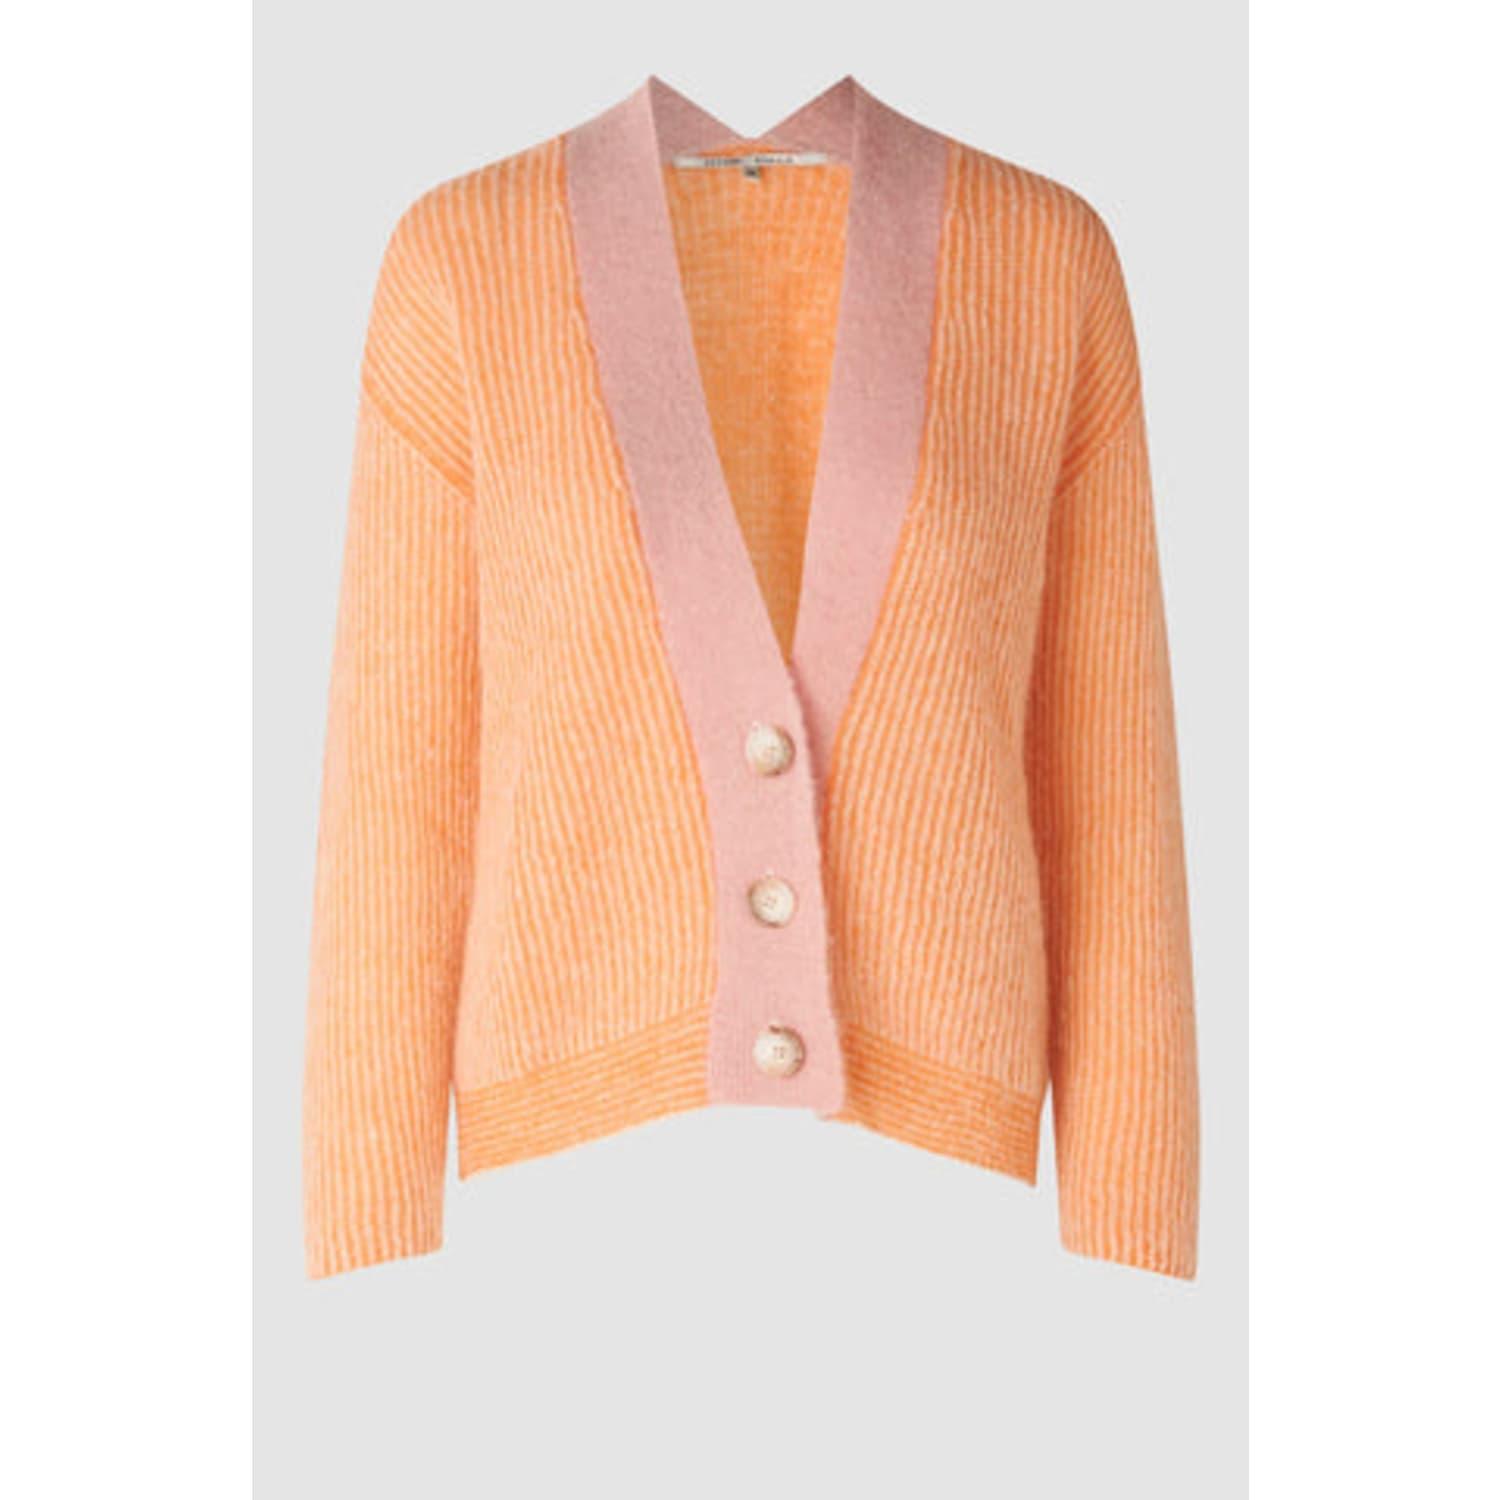 lækage Betsy Trotwood melodrama Second Female Vibse Knit Cardigan in Orange | Lyst